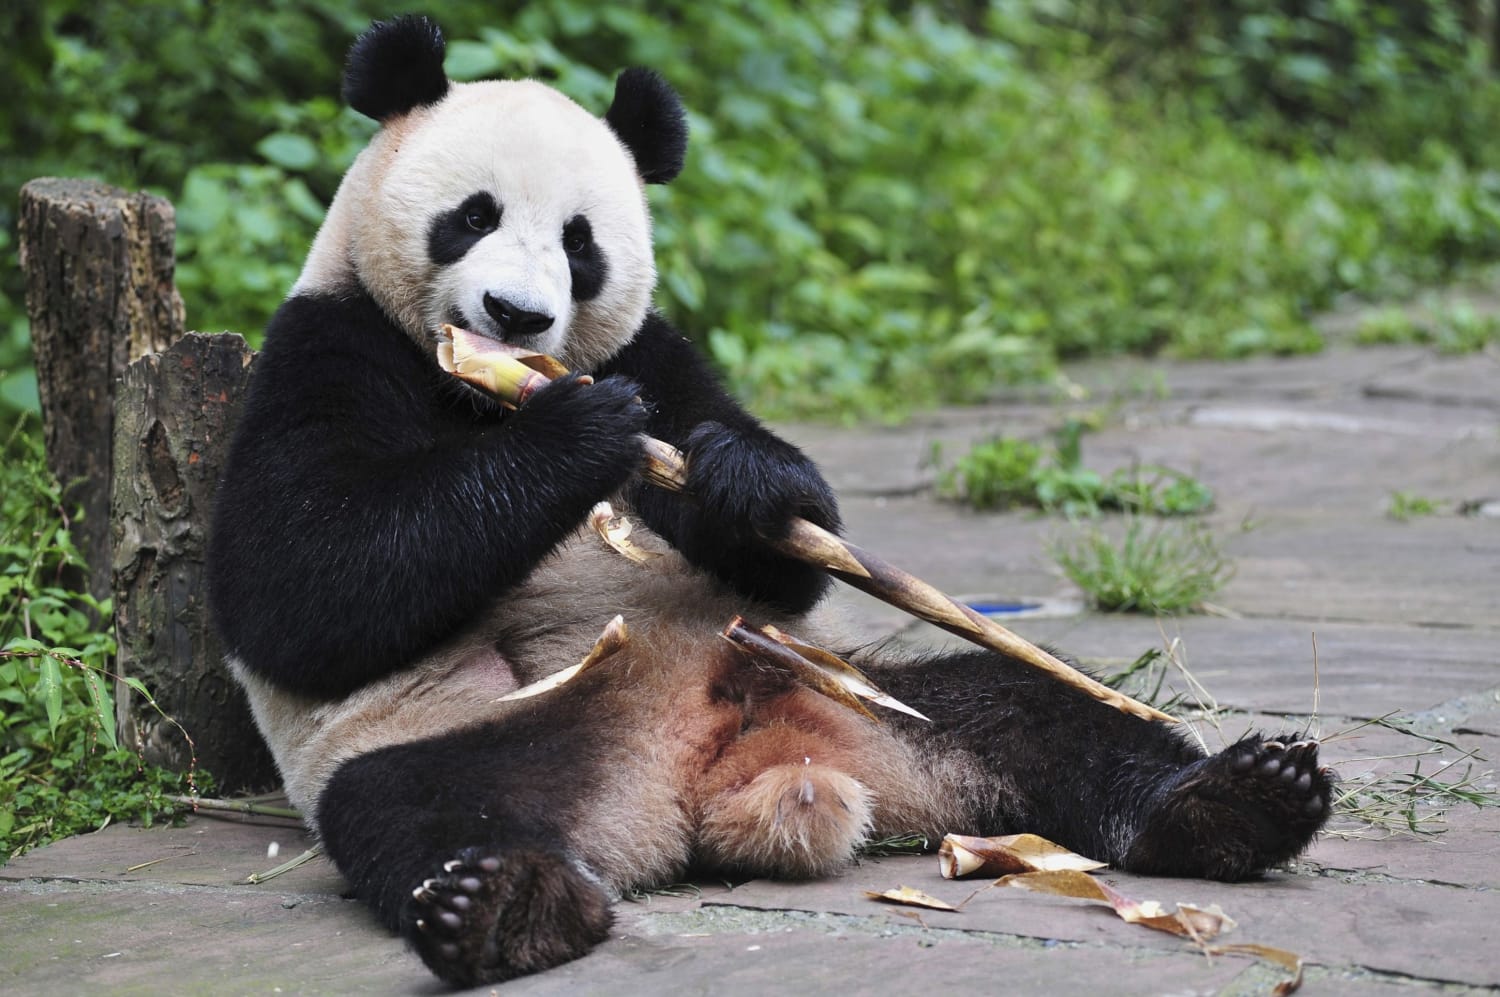 Bear Necessities Scientists Explain How Pandas Survive Eating Just Bamboo